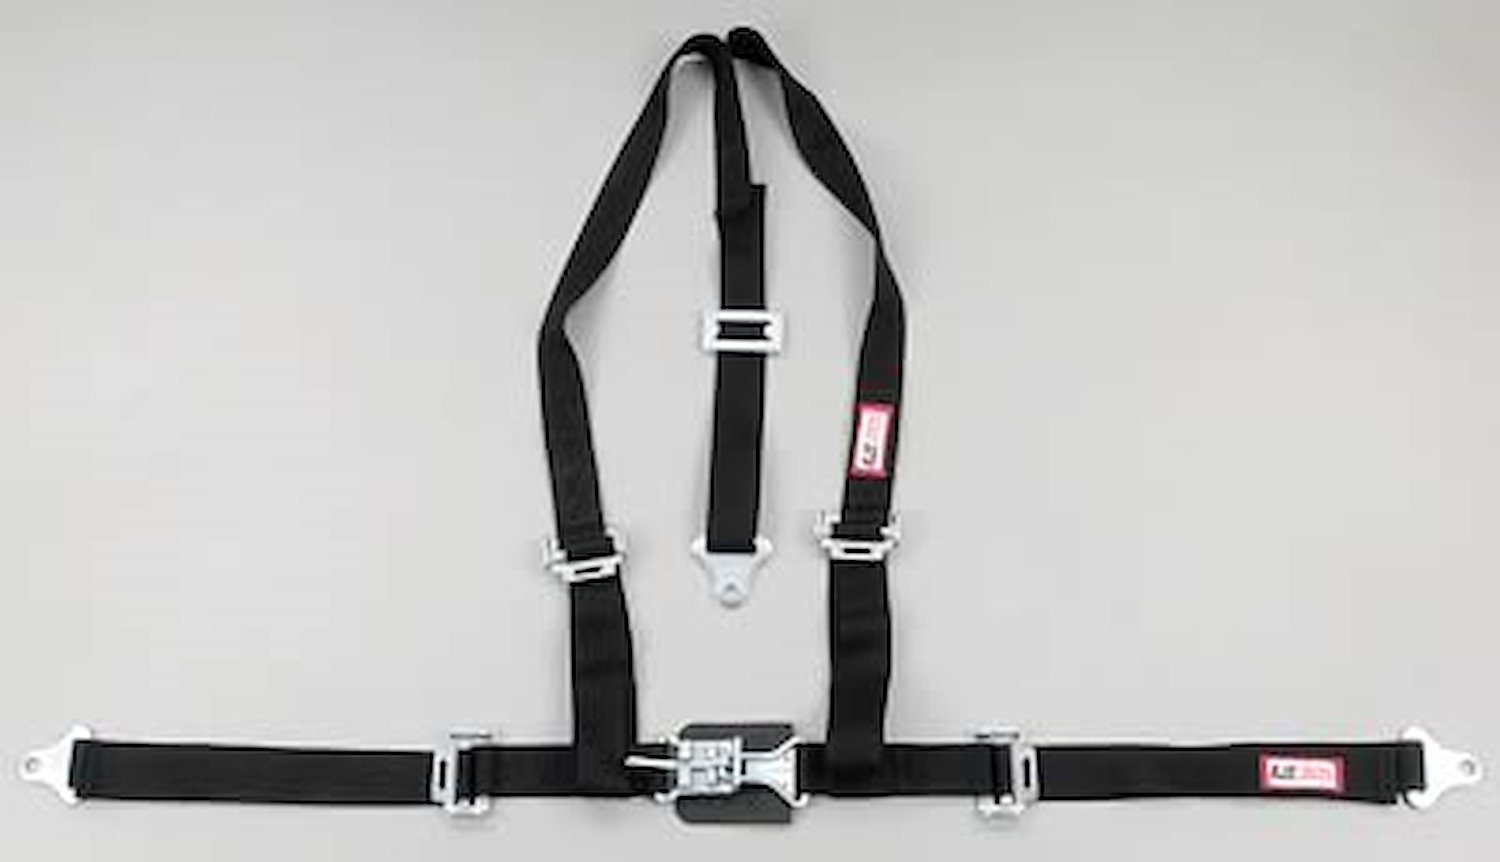 NON-SFI L&L HARNESS 3 PULL UP Lap BELT SNAP SEWN IN 2 S.H. Y FLOOR Mount WRAP/BOLT YELLOW